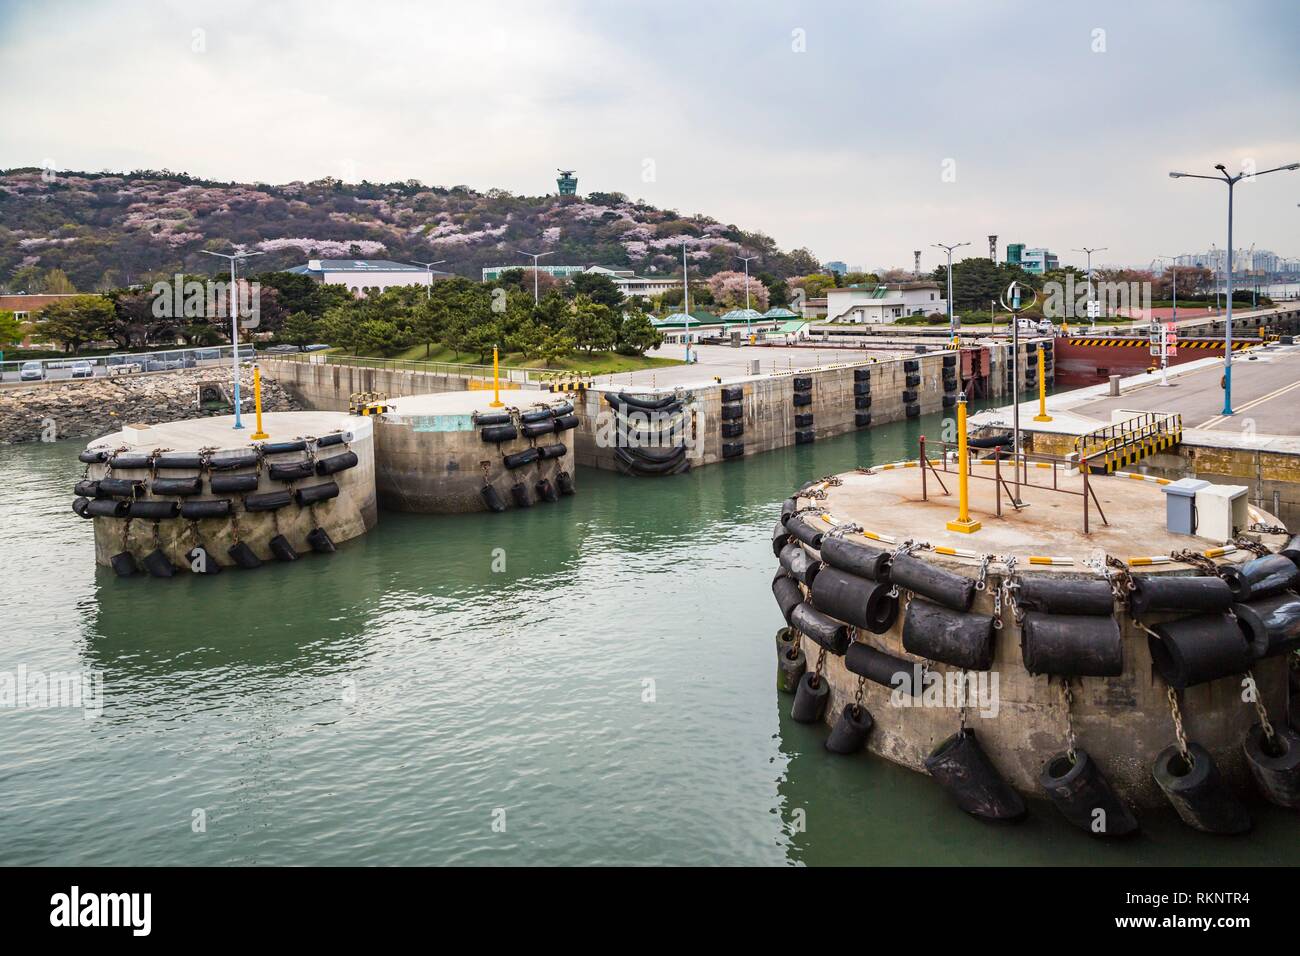 The locks at the entrance to the port of Incheon, South Korea, Asia. Stock Photo